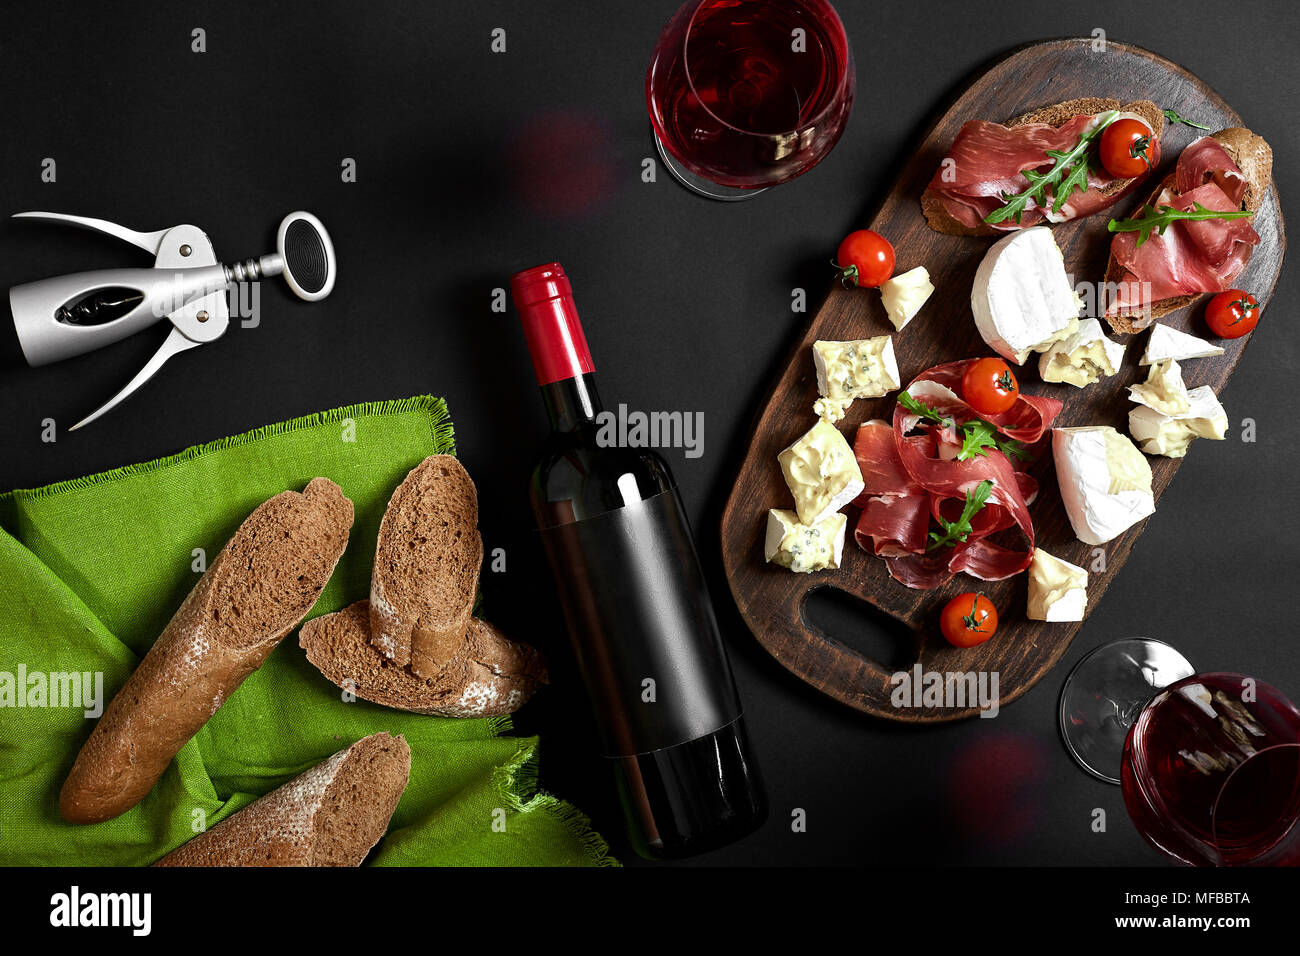 Delicious appetizer to wine - ham, cheese, baguette slices, tomatoes, served on a wooden board, and glass with red wine on black surface Stock Photo